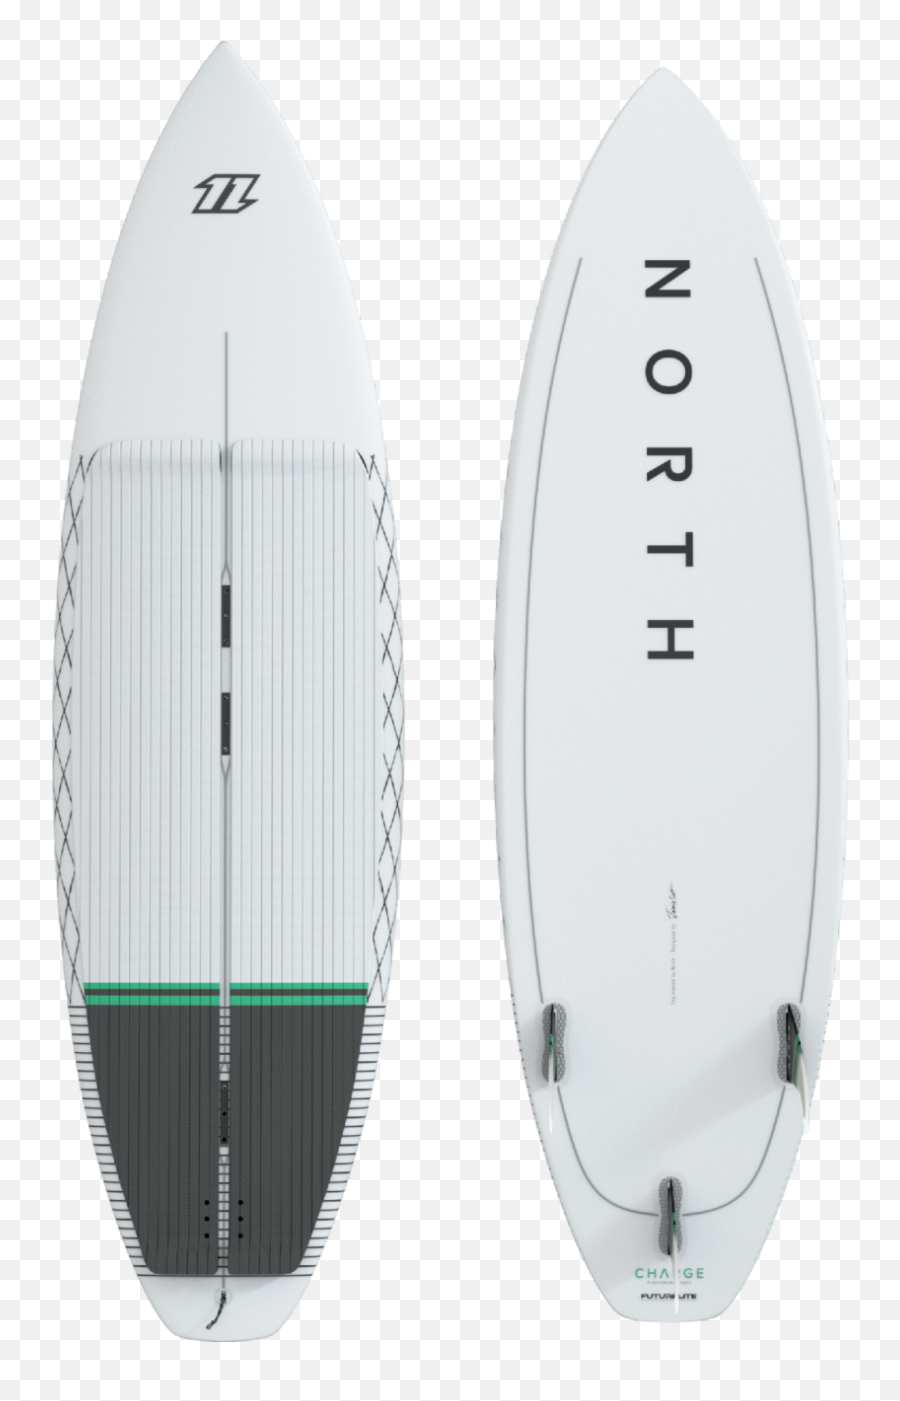 North Kiteboarding 2021 Surfboard Collection Products - North Kite Surfboards Png,Surf Board Png